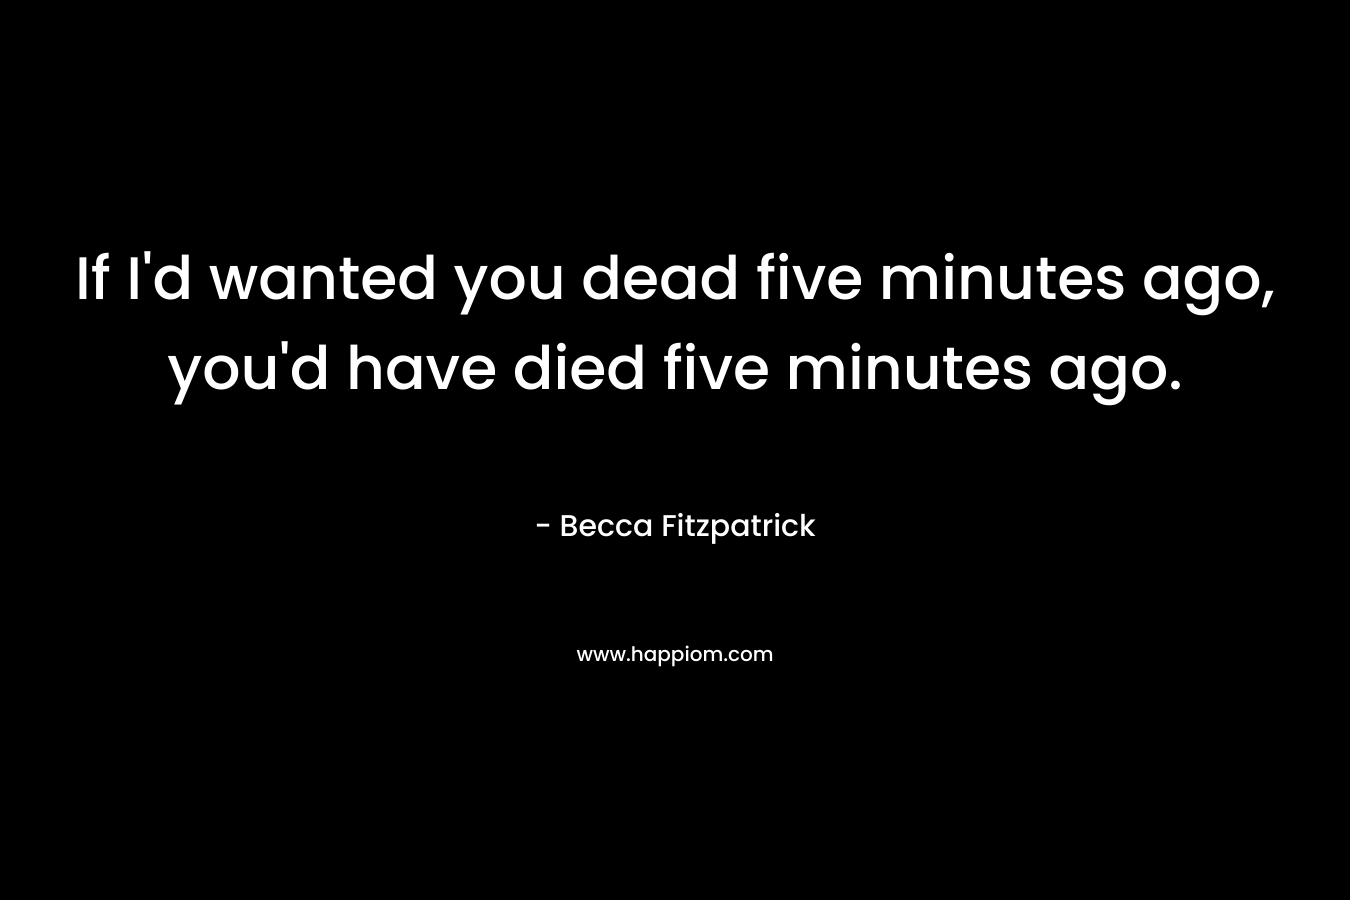 If I'd wanted you dead five minutes ago, you'd have died five minutes ago.